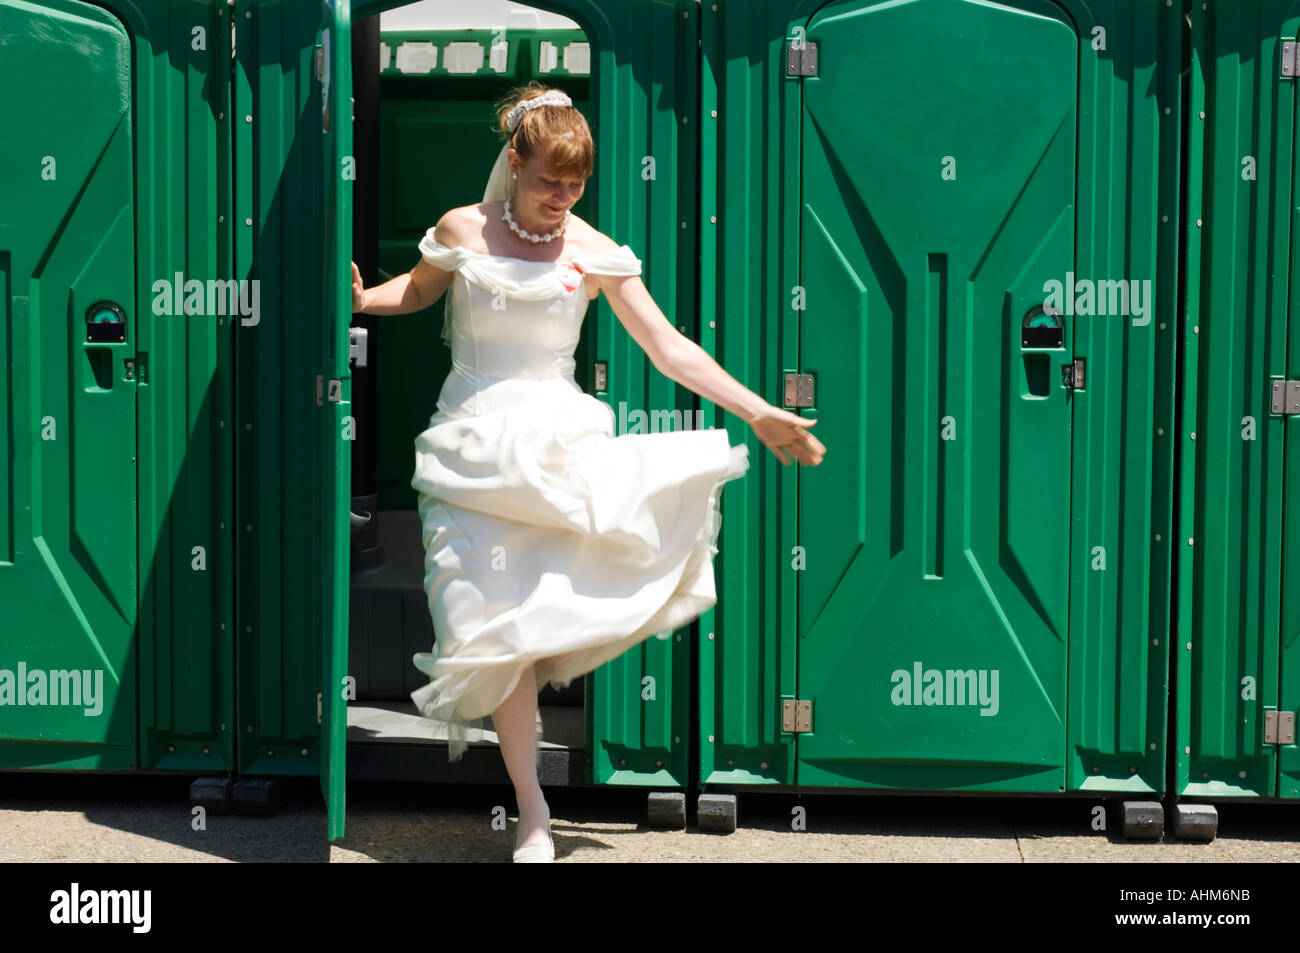 Bride stepping out of a portableble lavatory loo Stock Photo